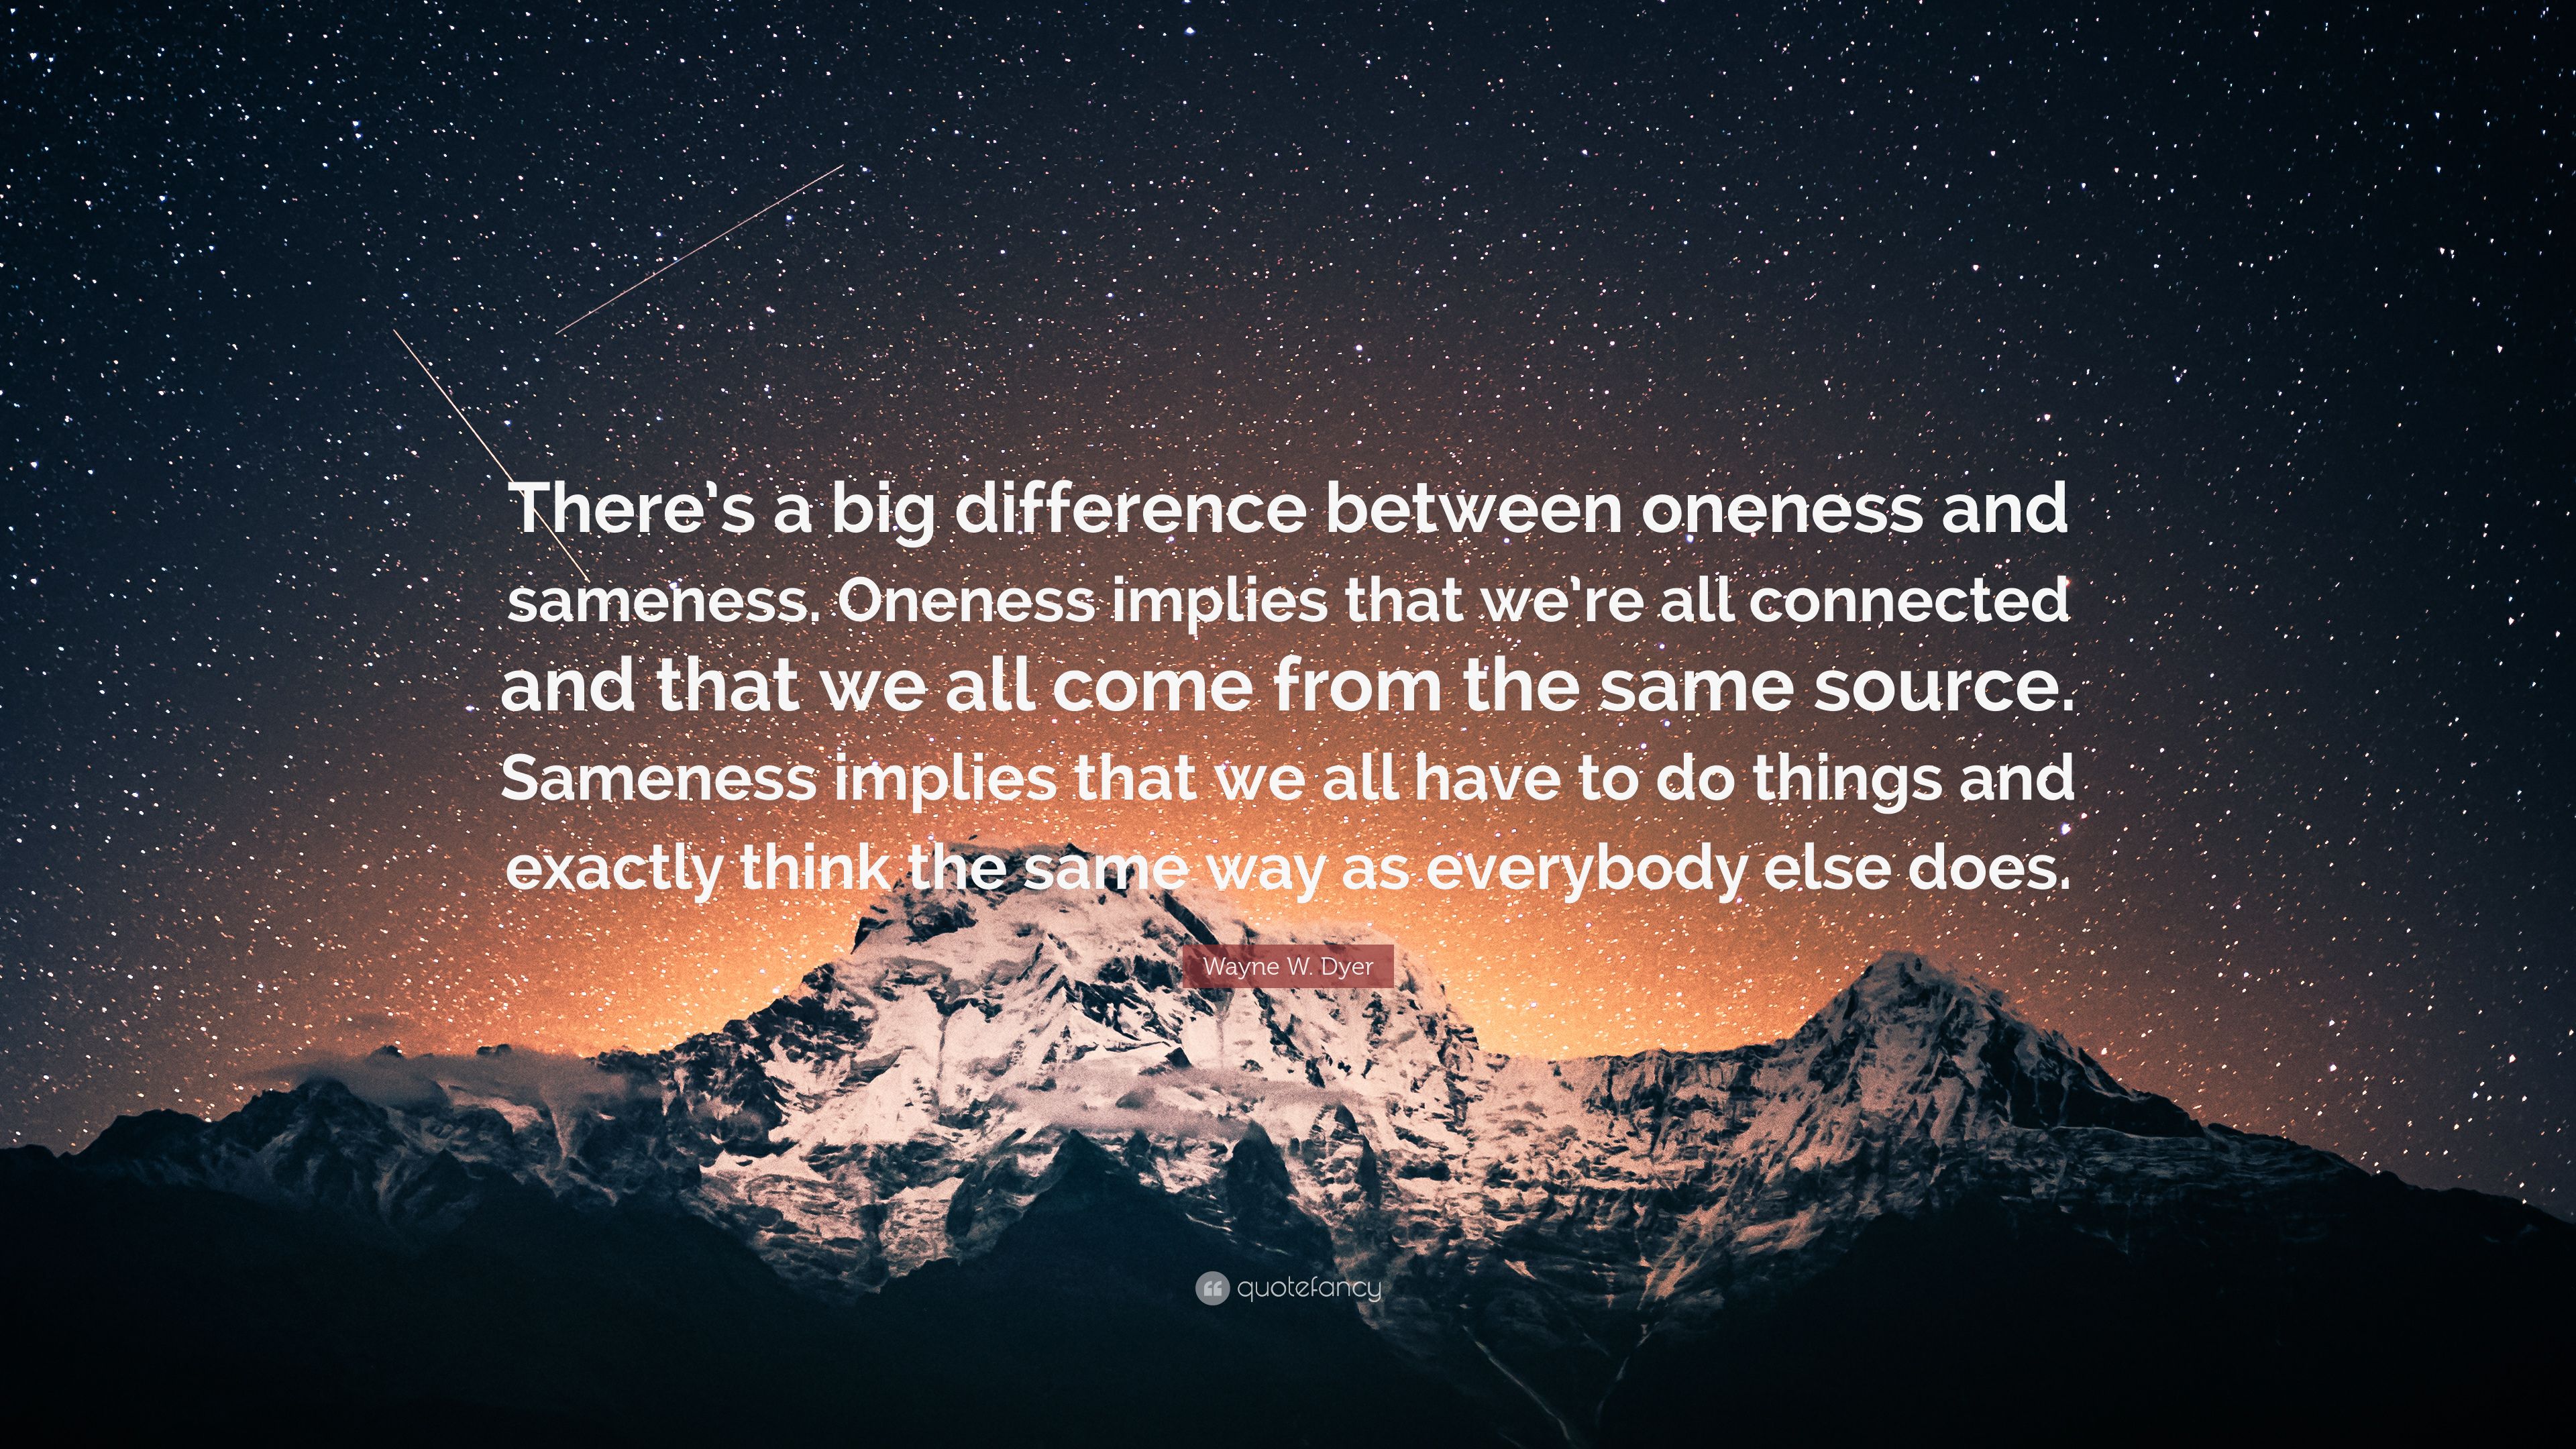 Wayne W. Dyer Quote: “There's a big difference between oneness and sameness. Oneness implies that we're all connected and that we all come fro.” (7 wallpaper)